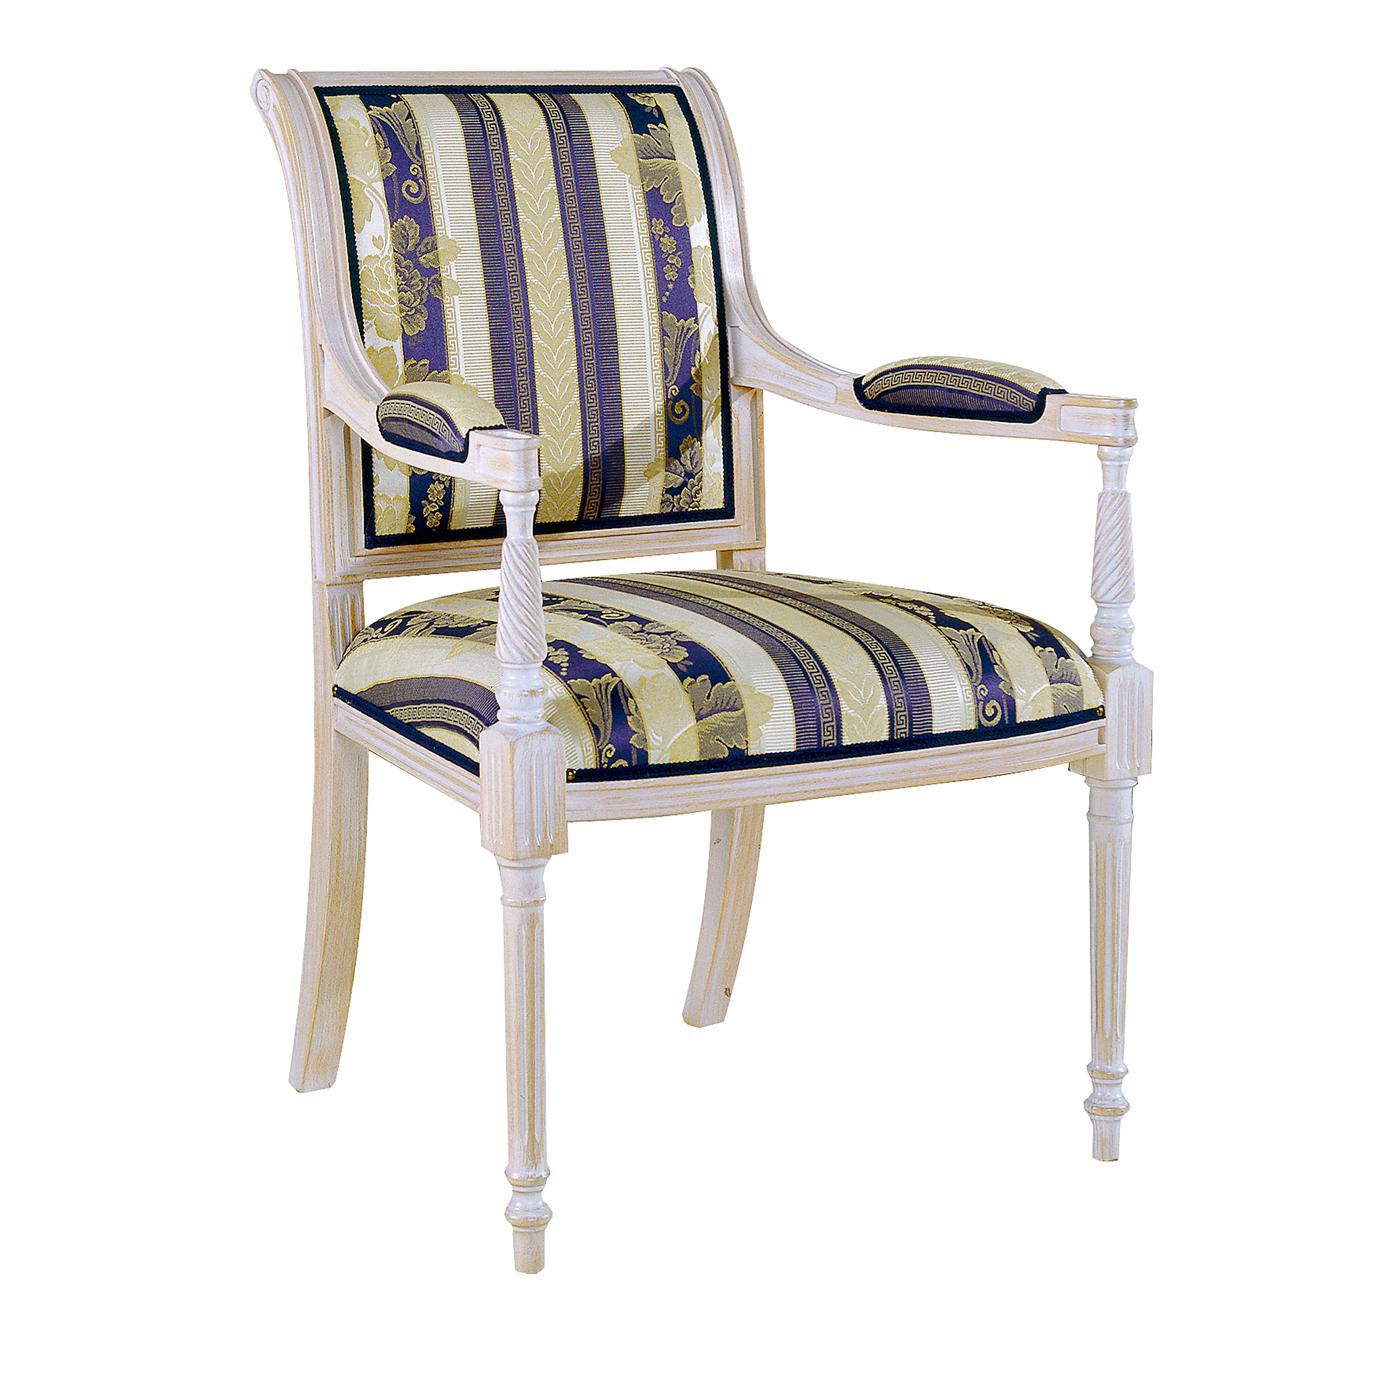 Italian Capotavola Striped Chair with Armrests